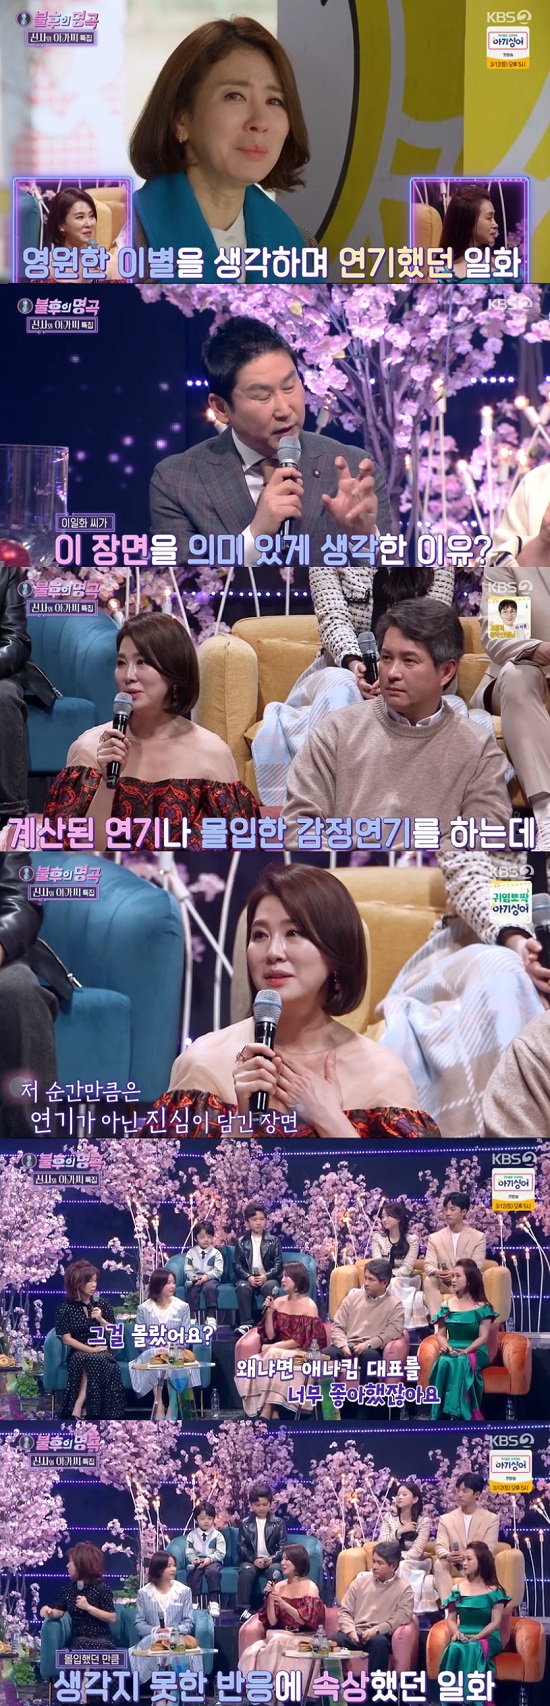 KBS2TVs Immortal Songs: Singing the Legend, which aired on the 5th, was featured as Gentleman and Lady.On this day, the main characters of KBS 2TV weekend drama Gentleman and Girl which is popular appeared.MC Shin Dong-yup told Yoo Jun-seo, I feel like I will meet frequently in entertainment programs later, I keep holding a microphone.Yoo Jun-seo said, The number one entertainment I want to do was Immortal Songs: Singing the Legend.Shin Dong-yup and Lee Chan-won were surprised and asked why.Yoo Jun-seo said, I thought it was really good to be able to show the song in front of people, so I wanted to try it once, but it is really good to be in Immortal Songs: Singing the Legend as an opportunity for gentleman and lady.Im Ye-jin said, Immortal Songs: Singing the Legend is our drama, and please do well in front of me.Kim Joon-hyun replied, I will do my best more.Shin Dong-yup said, Mr. Park Ha-na asked Immortal Songs: Whats your impression of singing the Legend? and Park Ha-na said, I havent slept for a week.Im Ye-jin wondered, Why? And Lee Chan-won asked, Because of the shooting schedule?Im so nervous, Park Ha-na said, I think Im dreaming now. Its a little strange to be with Team Actors.Since then, the scenes of the gentleman and lady cast members have been introduced.The best scene Lee Jong-Won picked was a scene about tearful denial, kneeling for her daughter and appealing with tears.The cast members were impressed by the scene where they could feel the fathers heart toward their daughter.Shin Dong-yup asked Lee Jong-Won, Did you act while thinking about your actual daughter? Lee Jong-Won said, I am raising my 20-year-old daughter, but I think I would have asked her to go down on her knees and break up.Shin Dong-yup said, For my child, I can not only kneel but also do more.Lee Jong-Won asked Kim Joon-hyun, What do you think about it? Kim Joon-hyun said, I have two daughters. If you hear that you played with your boyfriend in a nursery, you are just pissed.I am angry that I played fun for a 7-year-old. Lee Il-hwas famous scene was about A Lovely Mother, a scene of the close-knit mother, Annie Kim (Lee Il-hwa), who hides her own daughter Dandan (Lee Se-hee).Shin Dong-yup asked Lee Il-hwa, Is there a reason you thought this scene meaningful? Lee Il-hwa said, I usually perform calculated acting, I really get immersed and the feeling comes up. I think I really came up in that scene. What if I think I really saw my daughter last, I think I did it, he said.Moon Hee Kyung said, How much do you want to hold in your arms?Kim Joon-hyun said, I finally found out that Anna Kim was the daughter of Anna Kim. Lee Il-hwa said, I did not know that our Dandan would hate my mother so far.I was hurt so much, he said.Im Ye-jin asked, Did you not know that? Lee Il-hwa replied, Because I liked Anikim so much, because we have our degree, and if we are solid, we still have ....Im Ye-jin turned his back and laughed at him.Shin Dong-yup, who watched this, said, The sister-in-law is pushing too much, and Lee Il-hwa replied with a smile saying Im sorry.Moon Hee Kyung said: I would have had a bigger pain.Because of betrayal, said Lee Il-hwa, who was sympathetic to this, and Im Ye-jin said, These bad women understand each other. I do not understand.Lee Il-hwa refuted, I hate sins but I do not hate people. As such, Actors showed intense empathy for their respective roles.Immortal Songs: Singing the Legend MCs were amazed by the heated debate of Actors, and Shin Dong-yup said, Actors are so immersed that it makes sense to hit back and do this when viewers see someone who is really passing by and playing a bad role.Kim Joon-hyun joked, Even though its a broadcast (Im Ye-jin) doesnt even meet the eye with Lee Il-hwa.Im Ye-jin laughed as he showed a hyperindulgence (?) saying, Just meet me in the drama, its very great.Photo = KBS 2TV broadcast screen